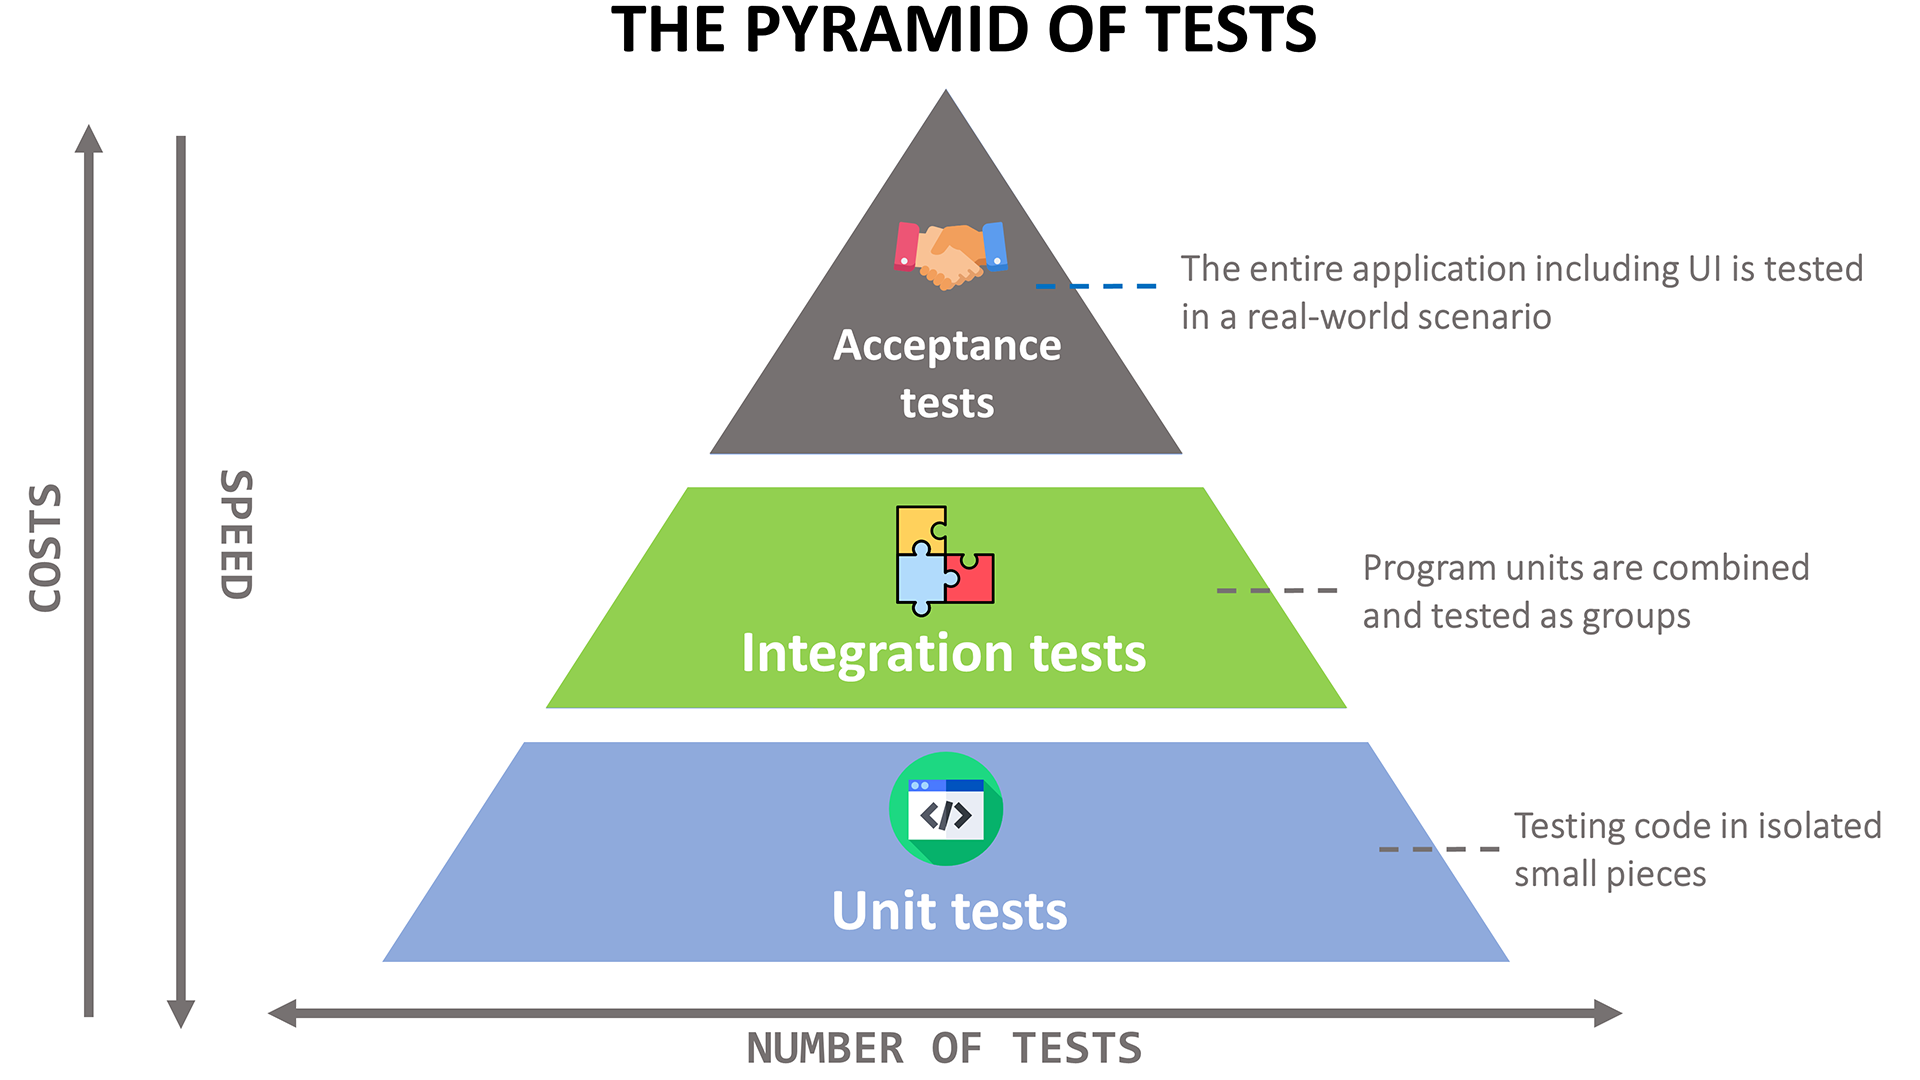 The pyramid of tests